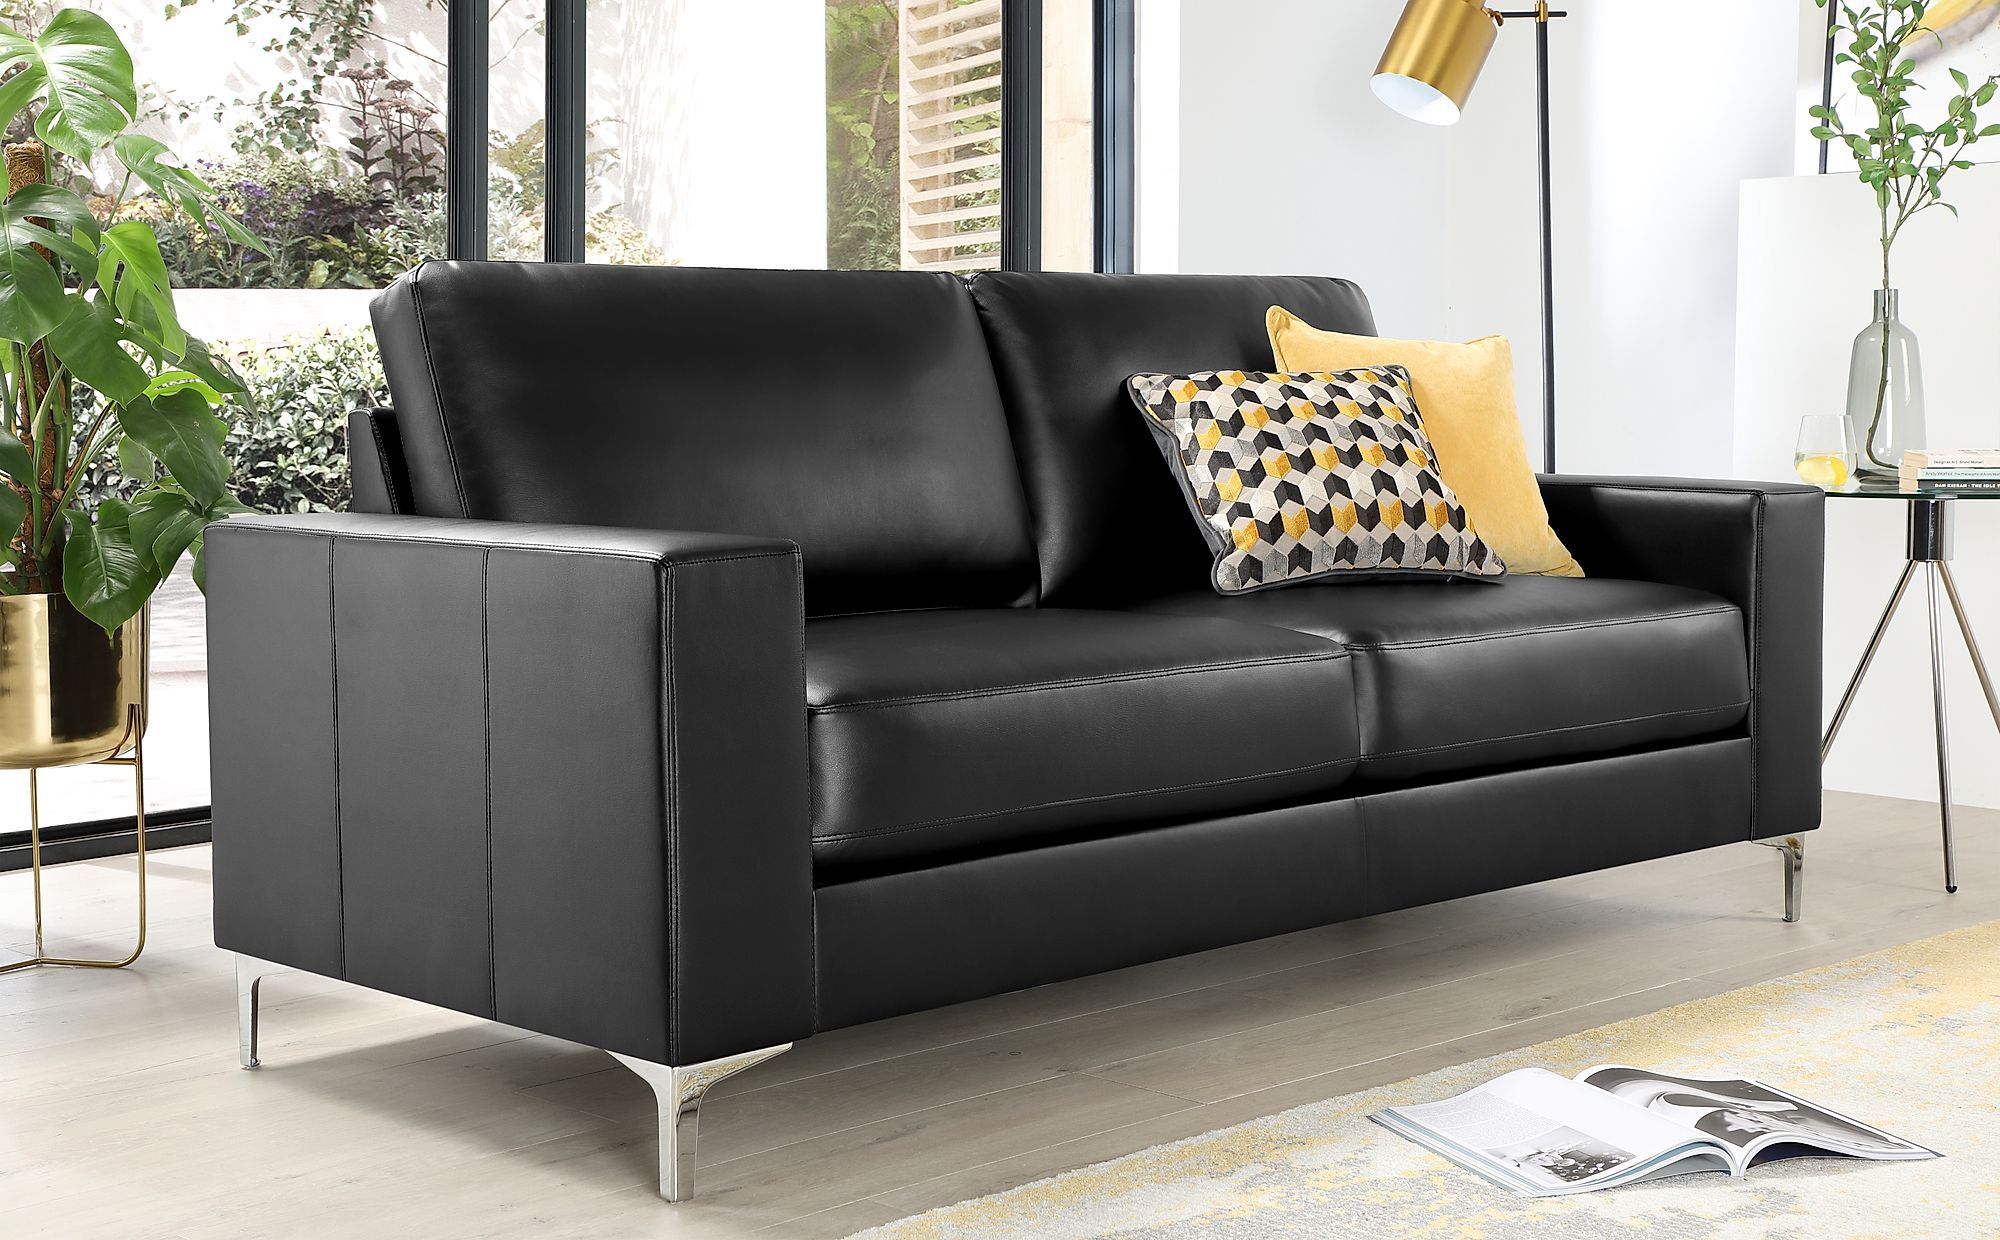 Baltimore Black Leather 3 Seater Sofa | Furniture Choice Within Sofas In Black (View 3 of 20)